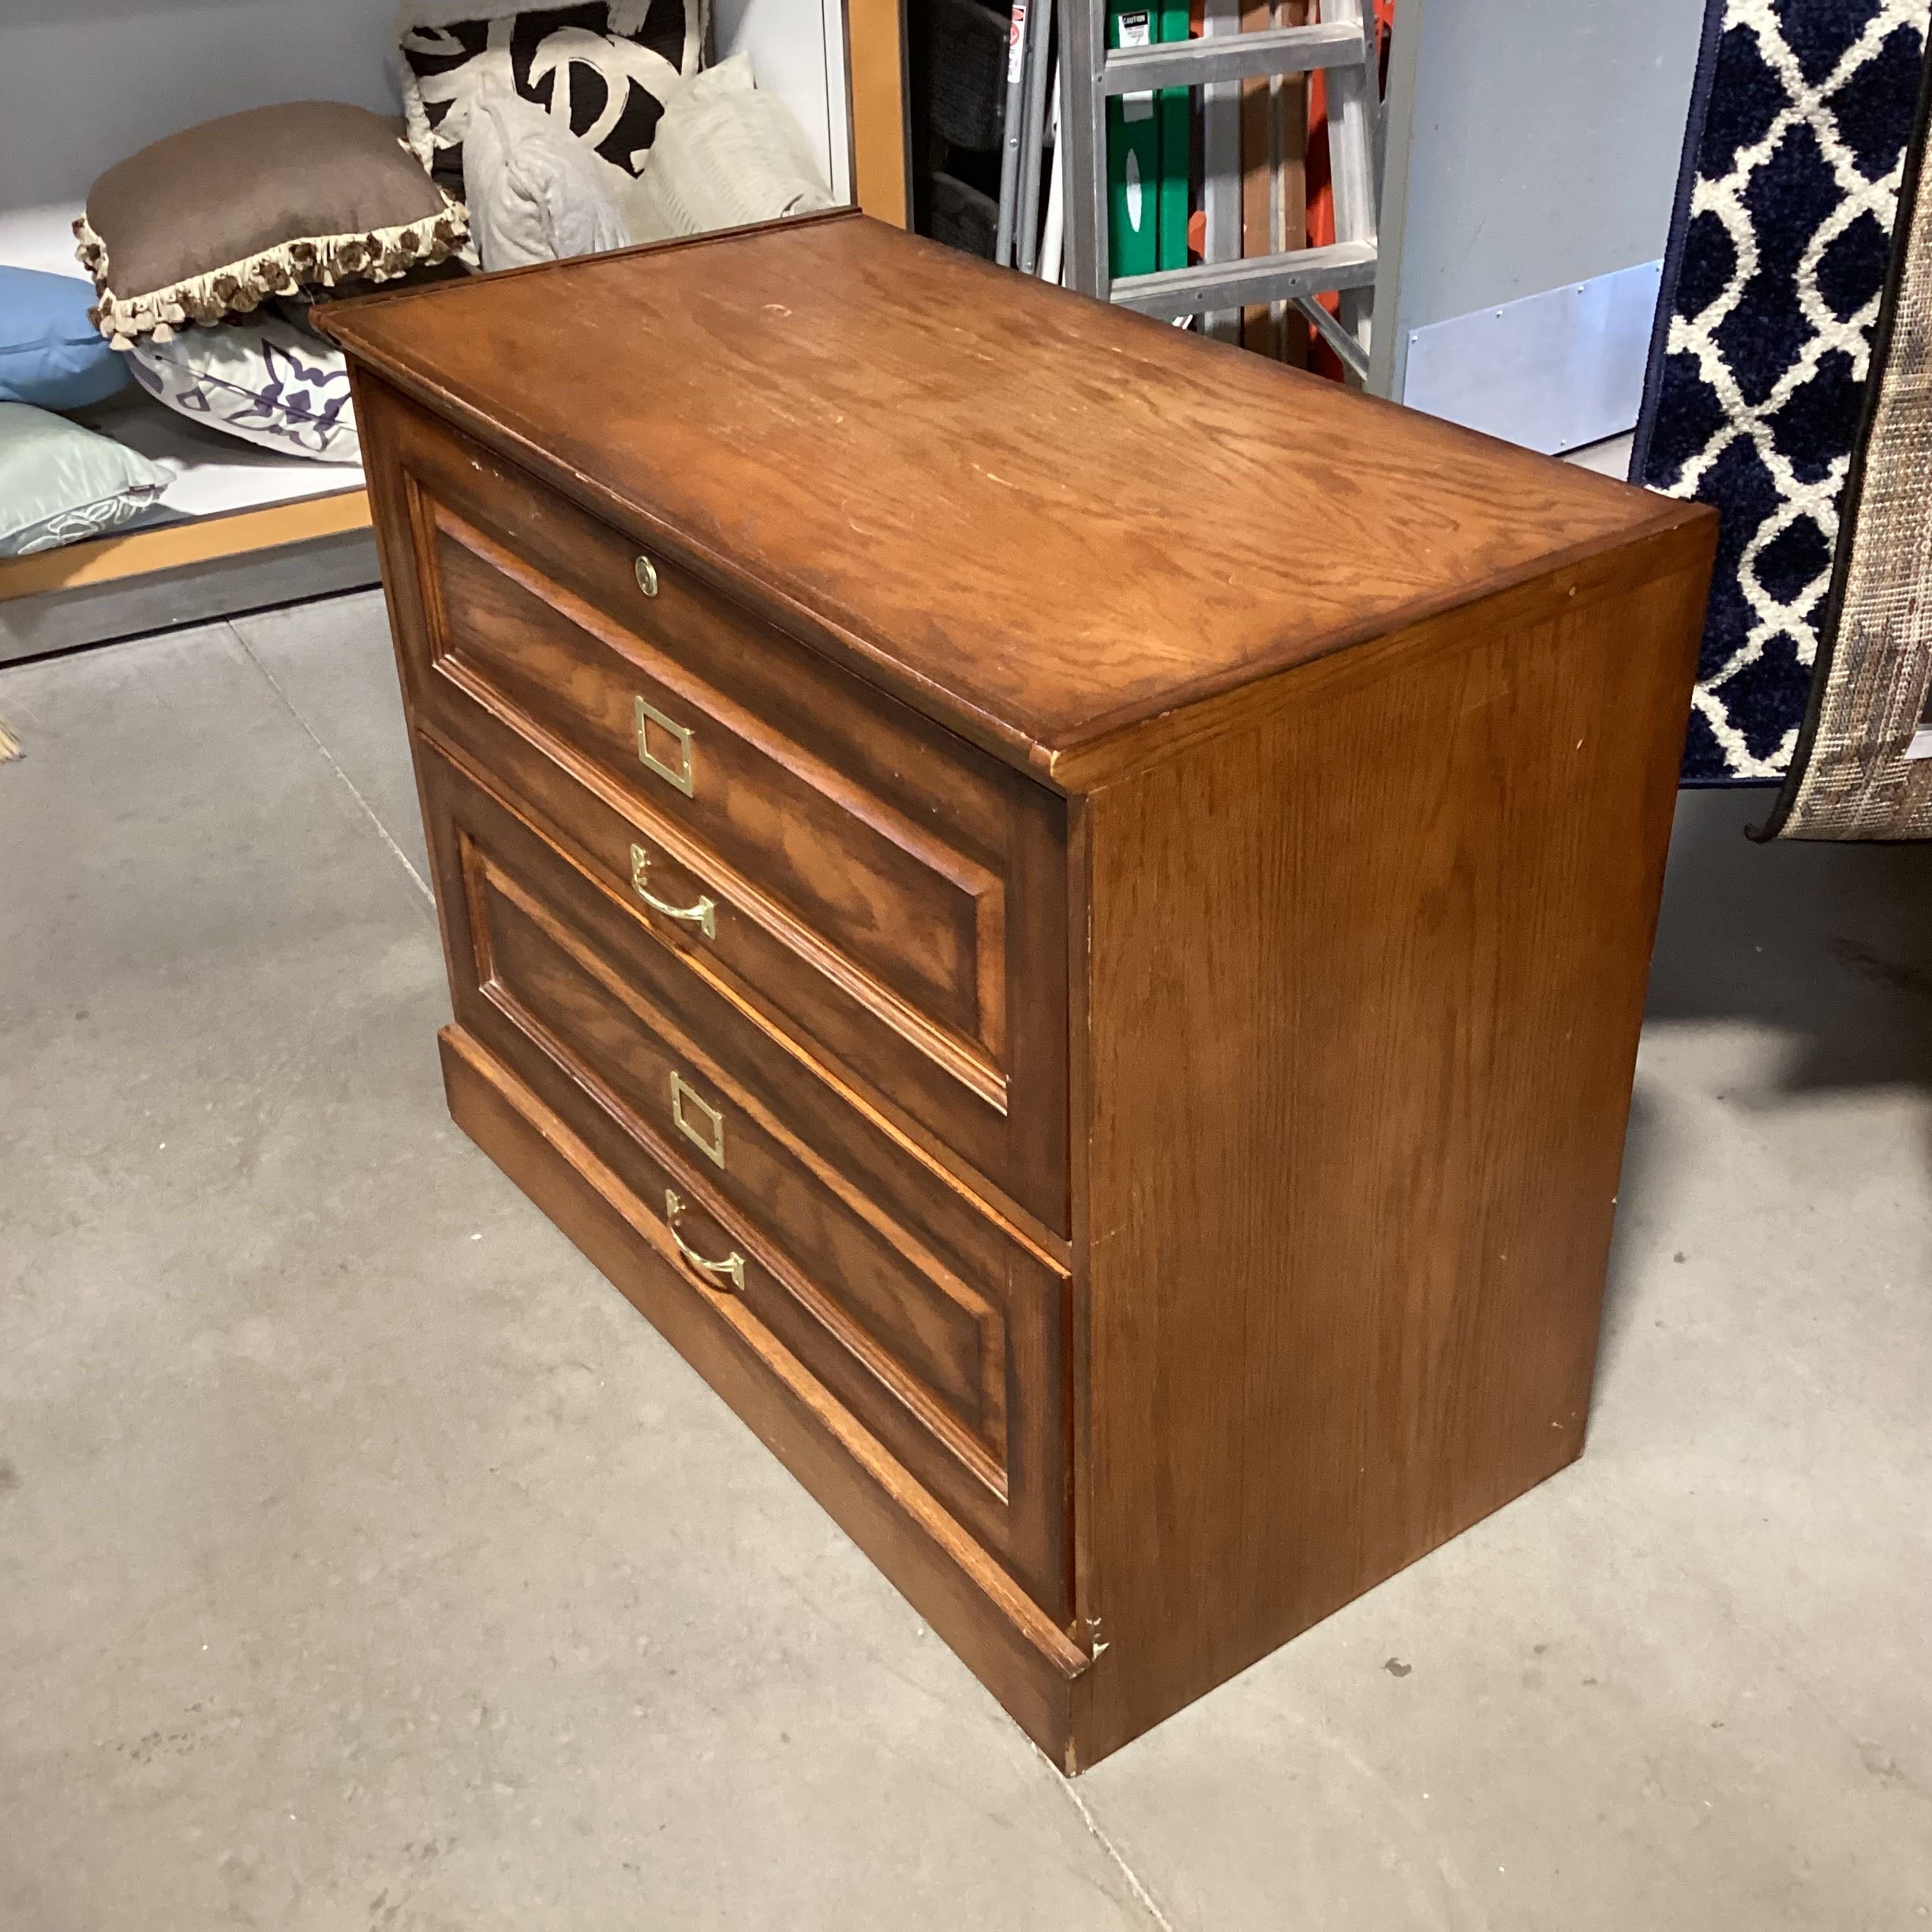 2 Drawer Wood with Brass Accents Filing Cabinet